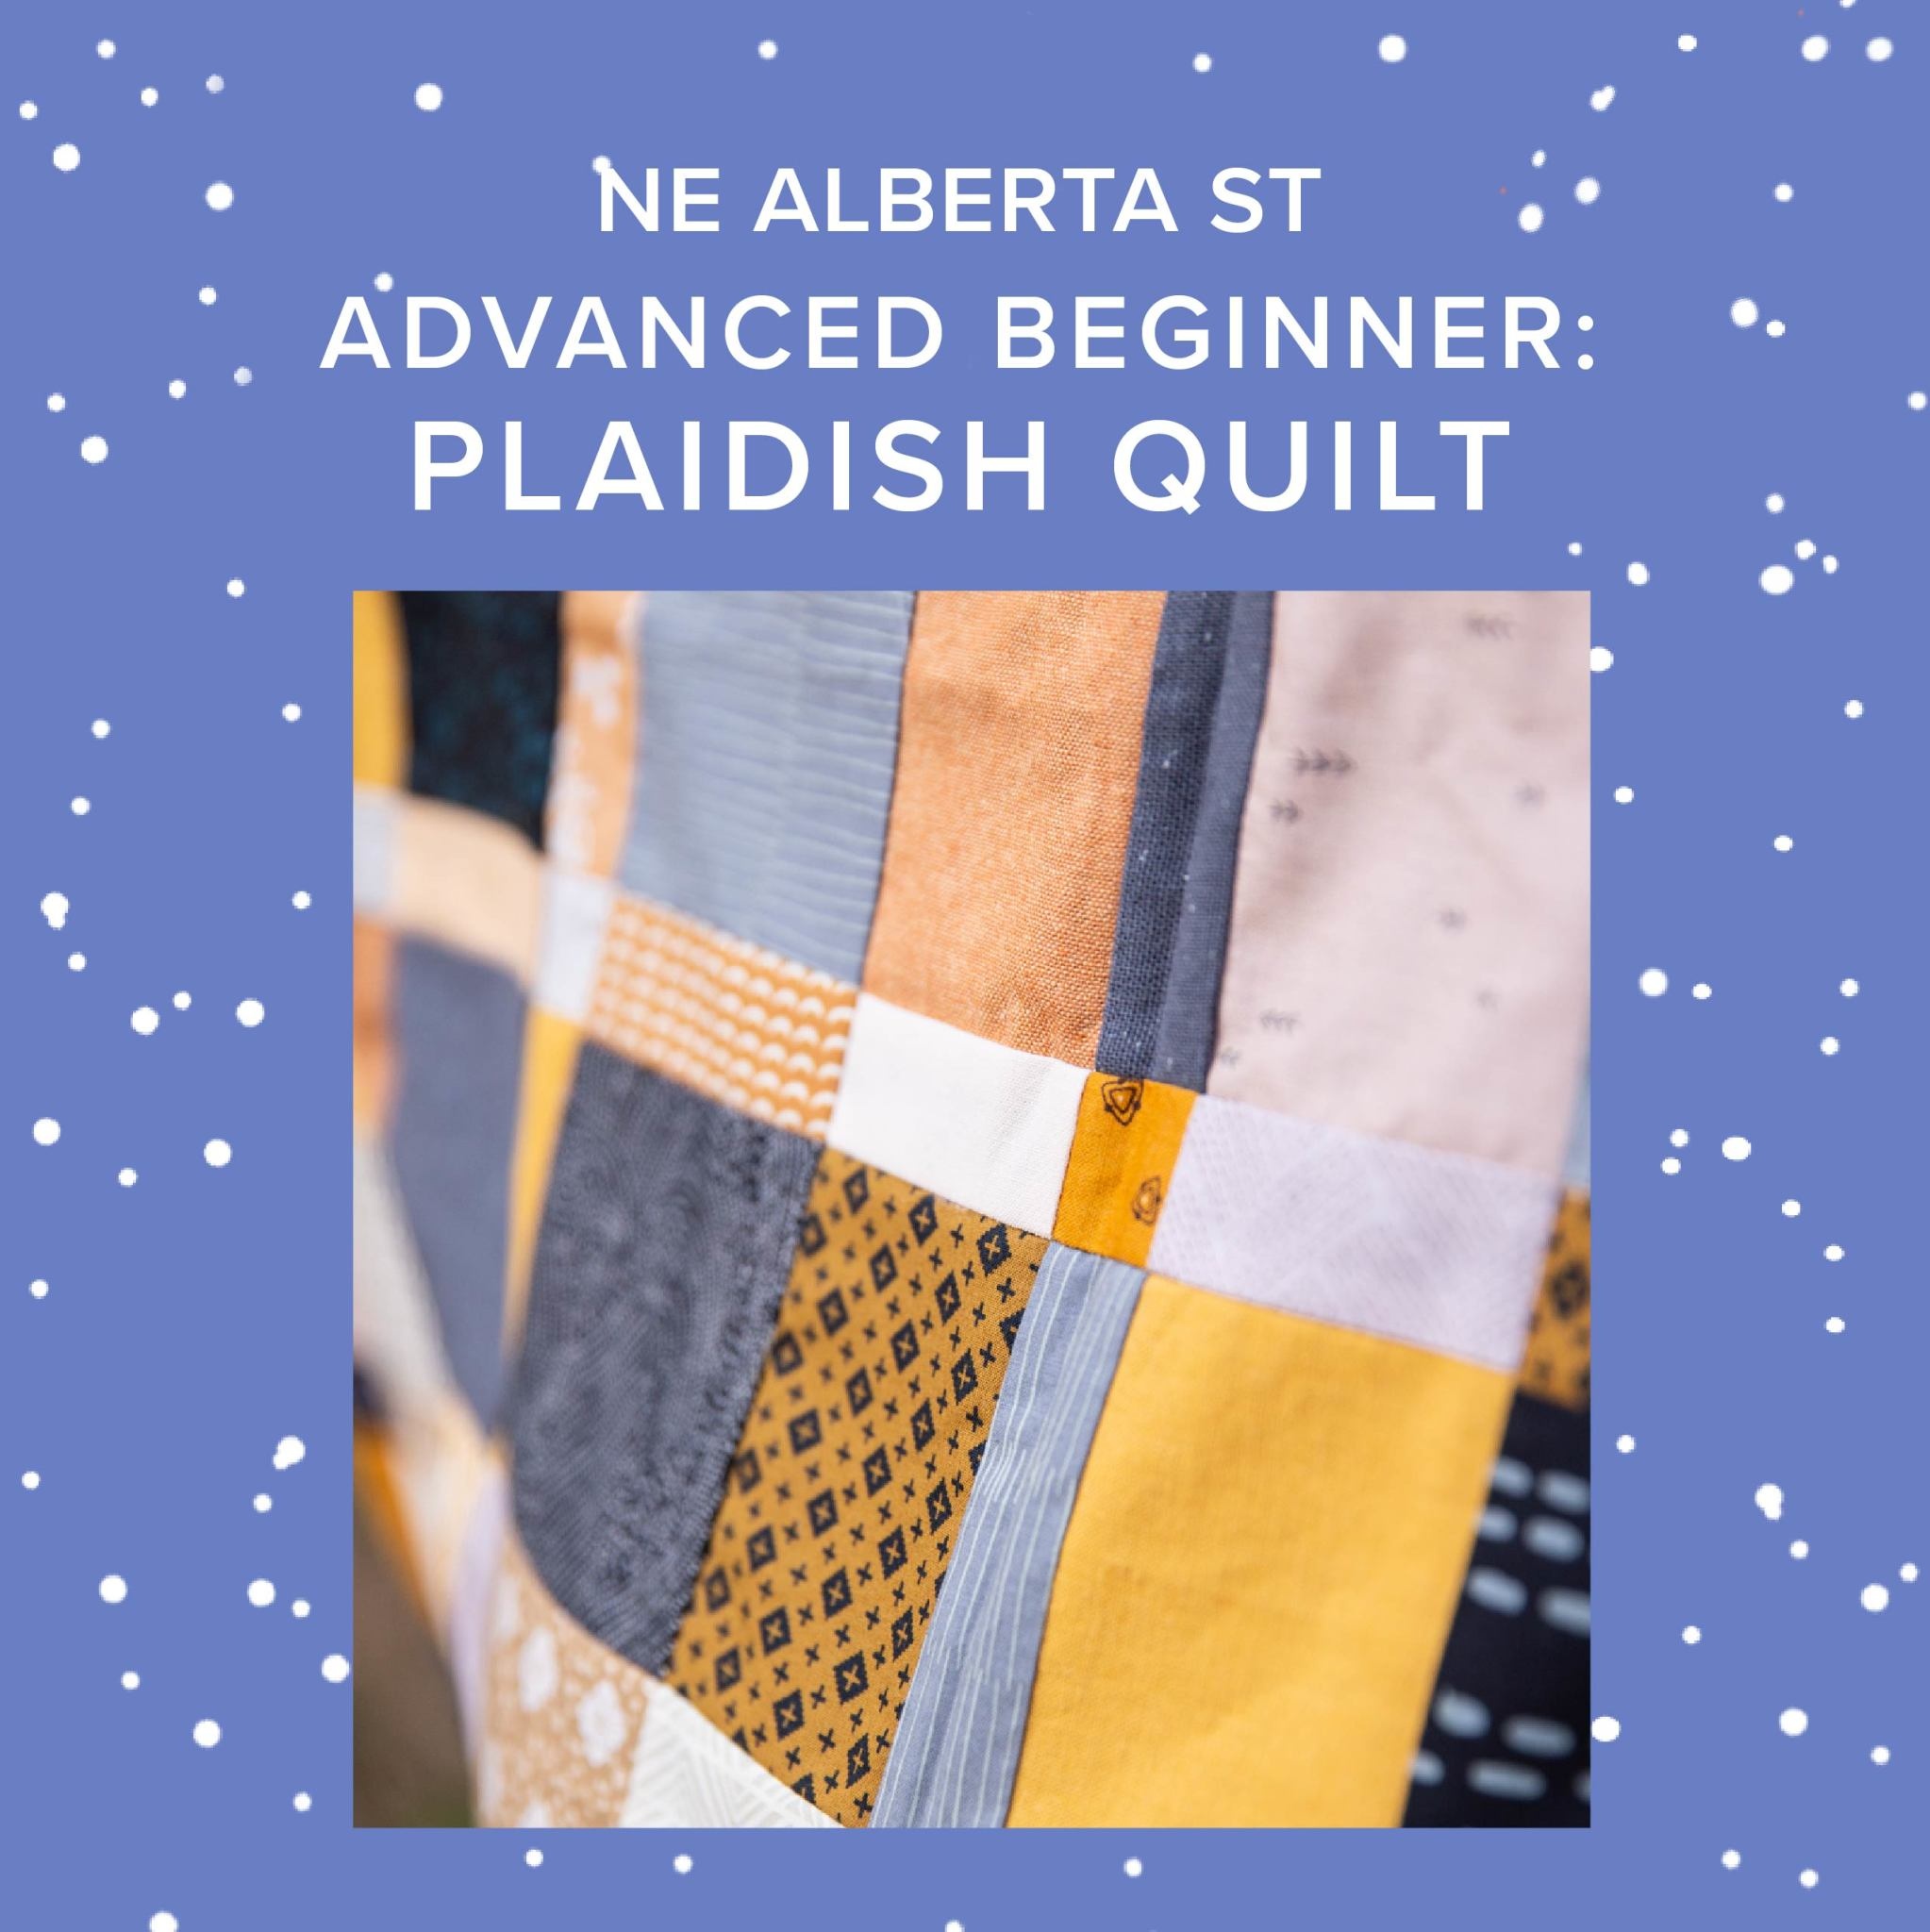 Courtney Zerizef Advanced Beginner: Plaidish Quilt, Saturday, May 4th & 11th, 2pm-4:30pm Sunday, May 5th, 10:30am-1pm